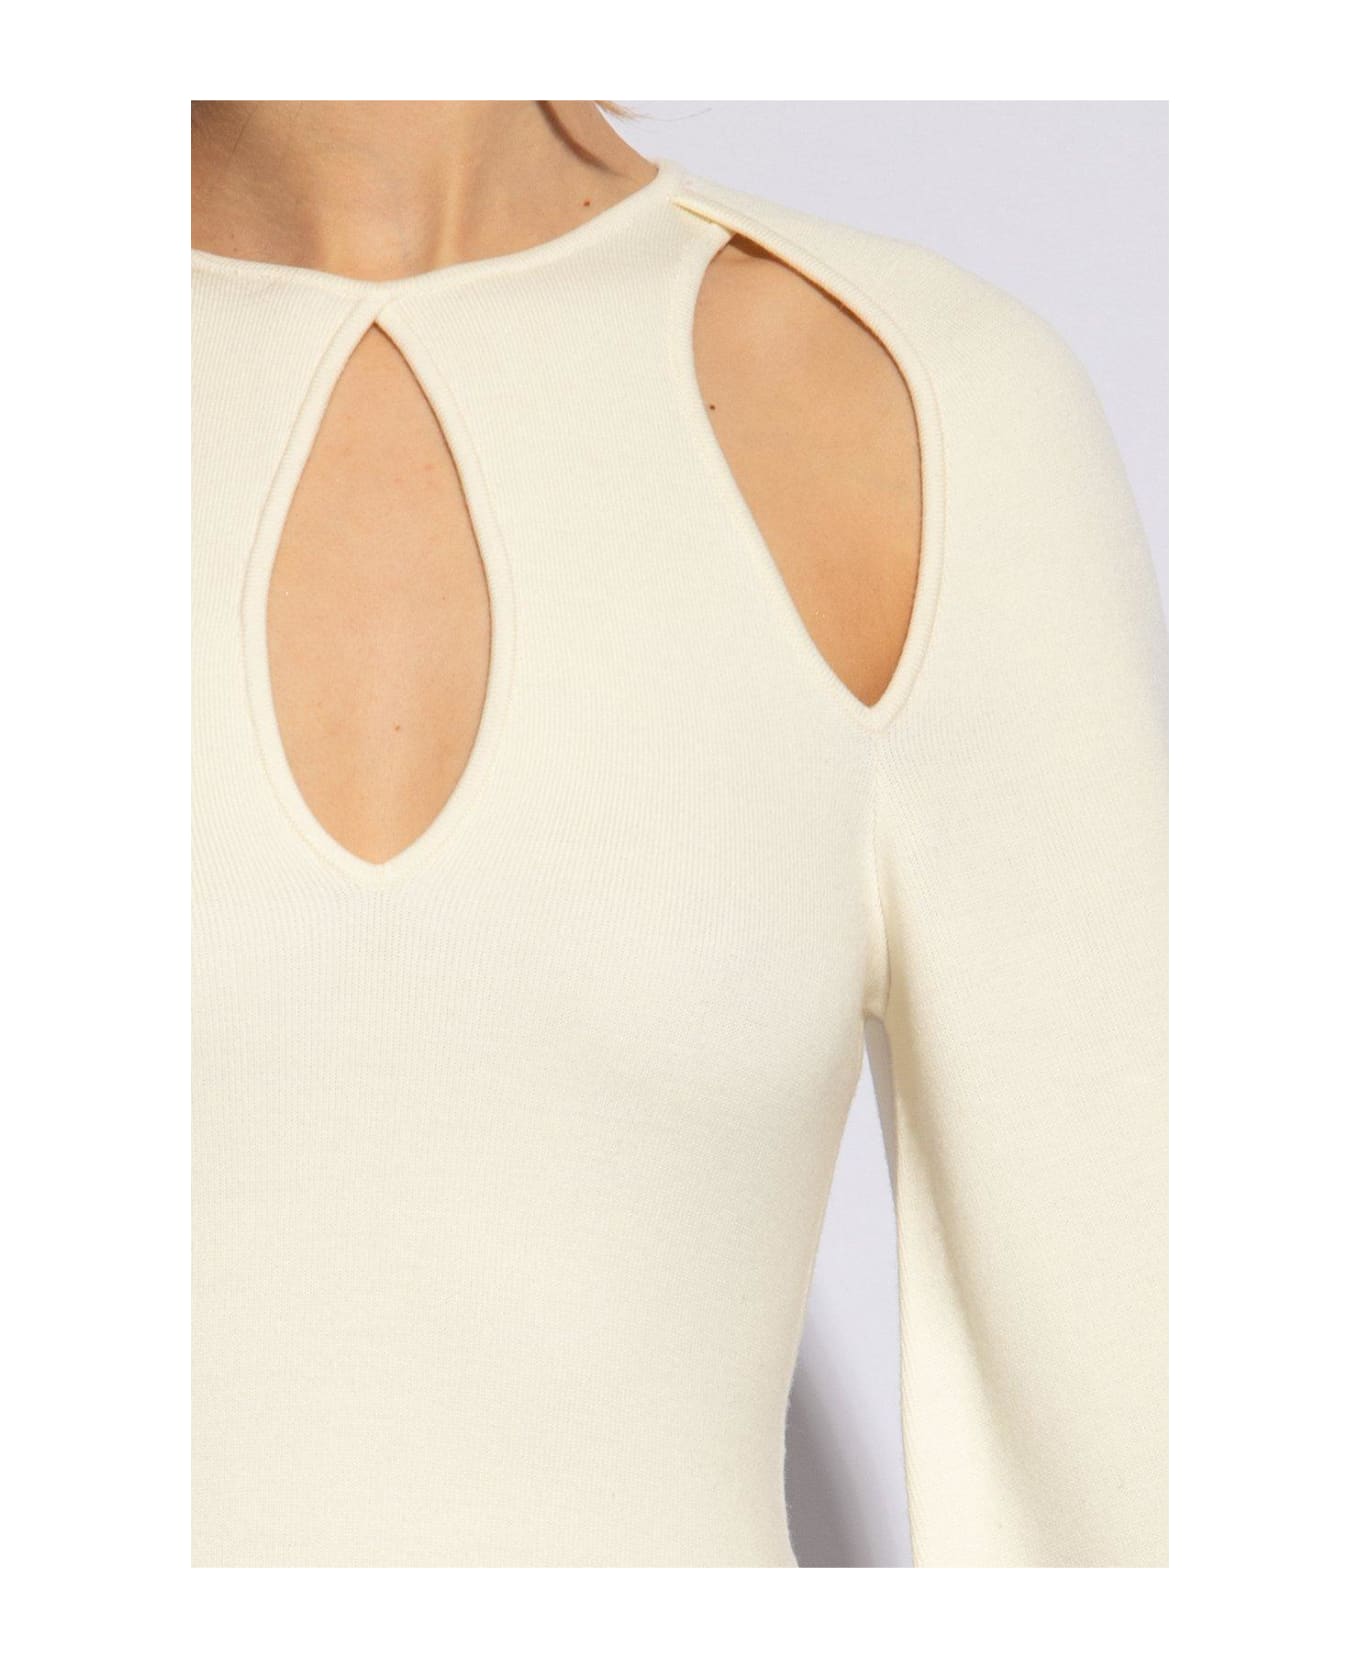 Chloé Puff-sleeved Cut-out Knit Top - Iconic milk